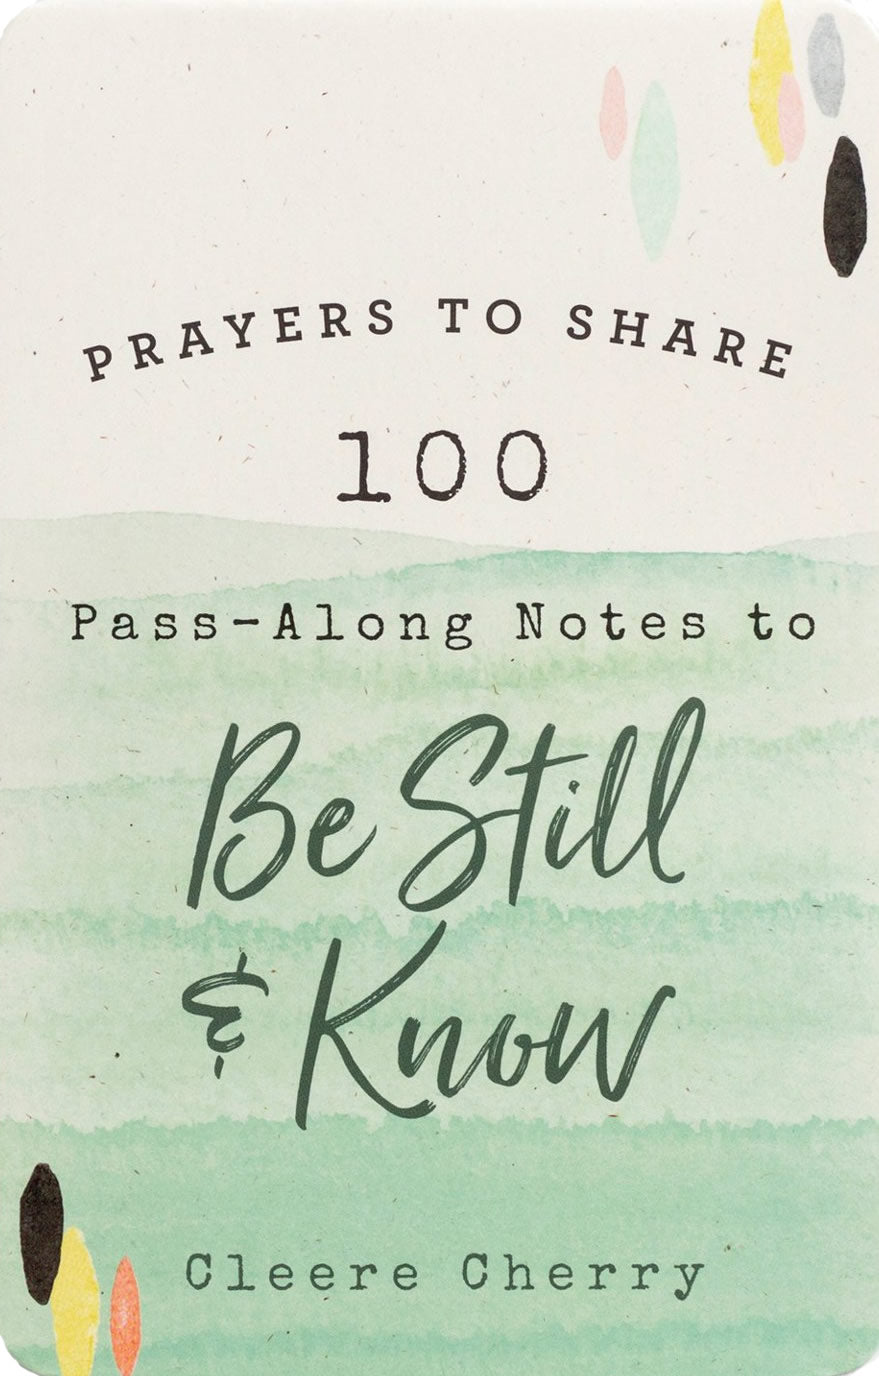 PRAYERS TO SHARE - 100 PASS-ALONG NOTES TO BE STILL & KNOW